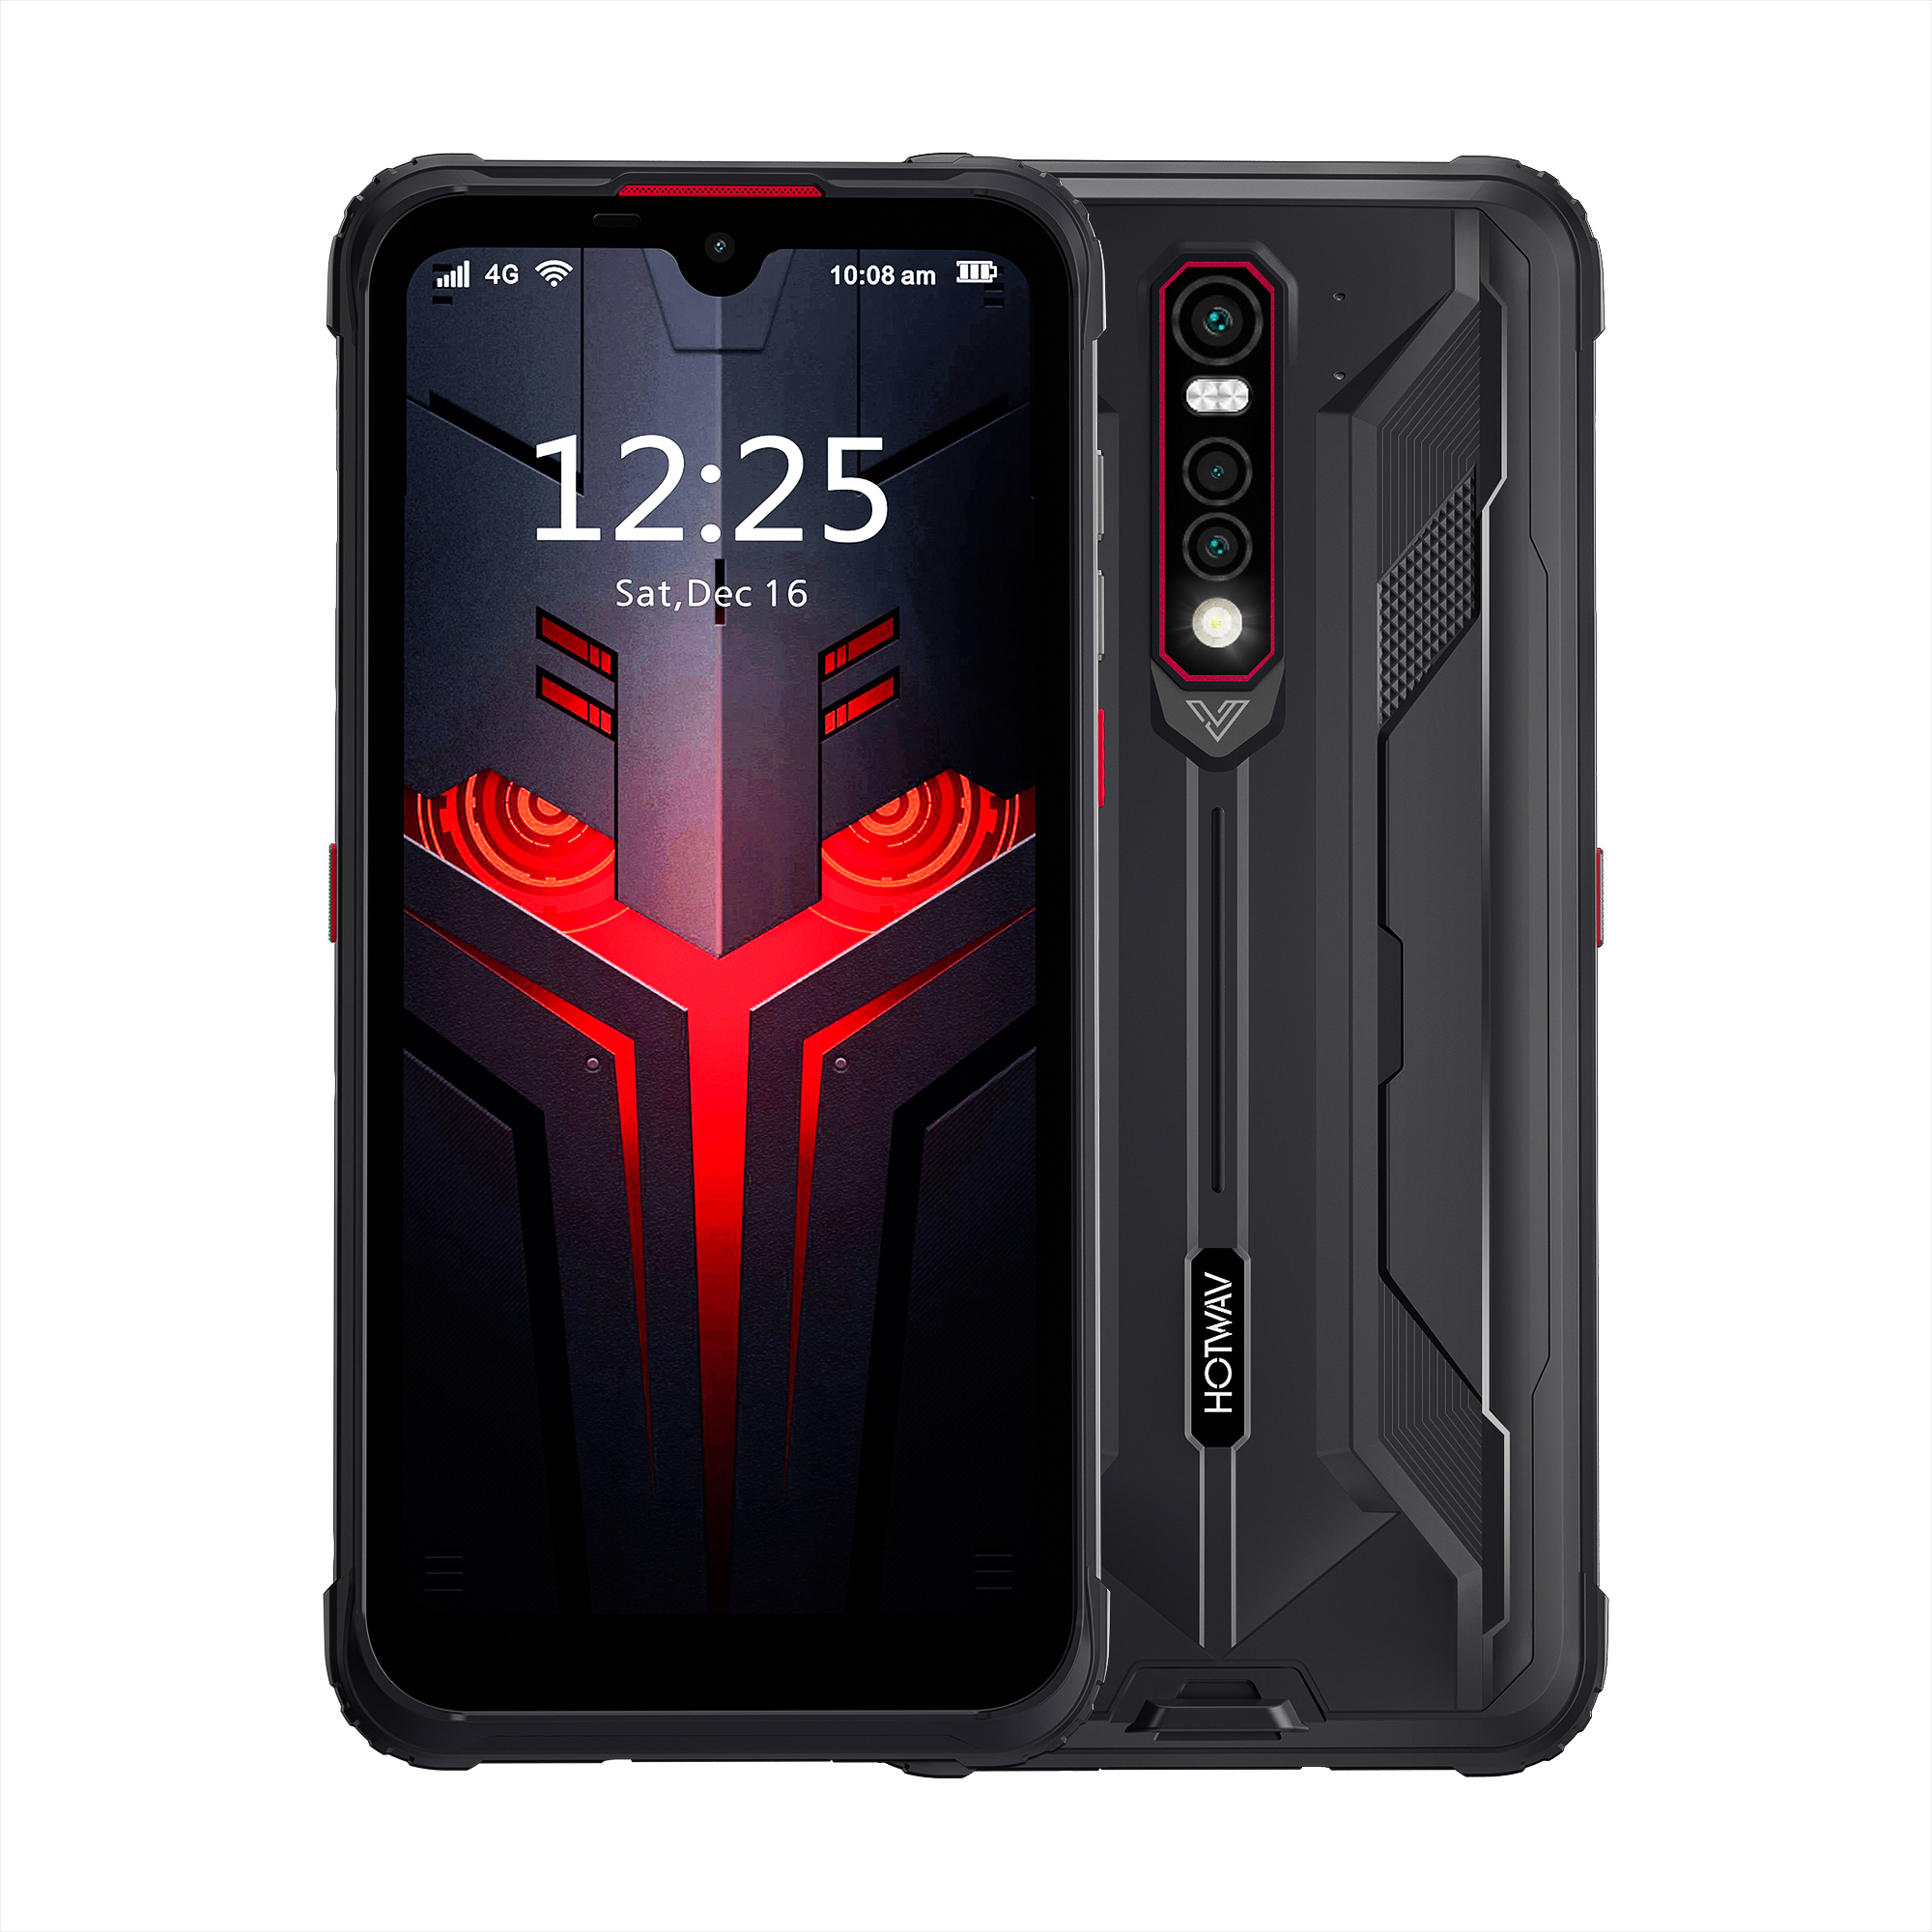 Find HOTWAV CYBER 8 Global Version 4GB 64GB IP68 IP69K Waterproof 8280mAh MT6762 16MP Triple Camera 6 3 inch NFC Android 11 Rugged Smartphone for Sale on Gipsybee.com with cryptocurrencies